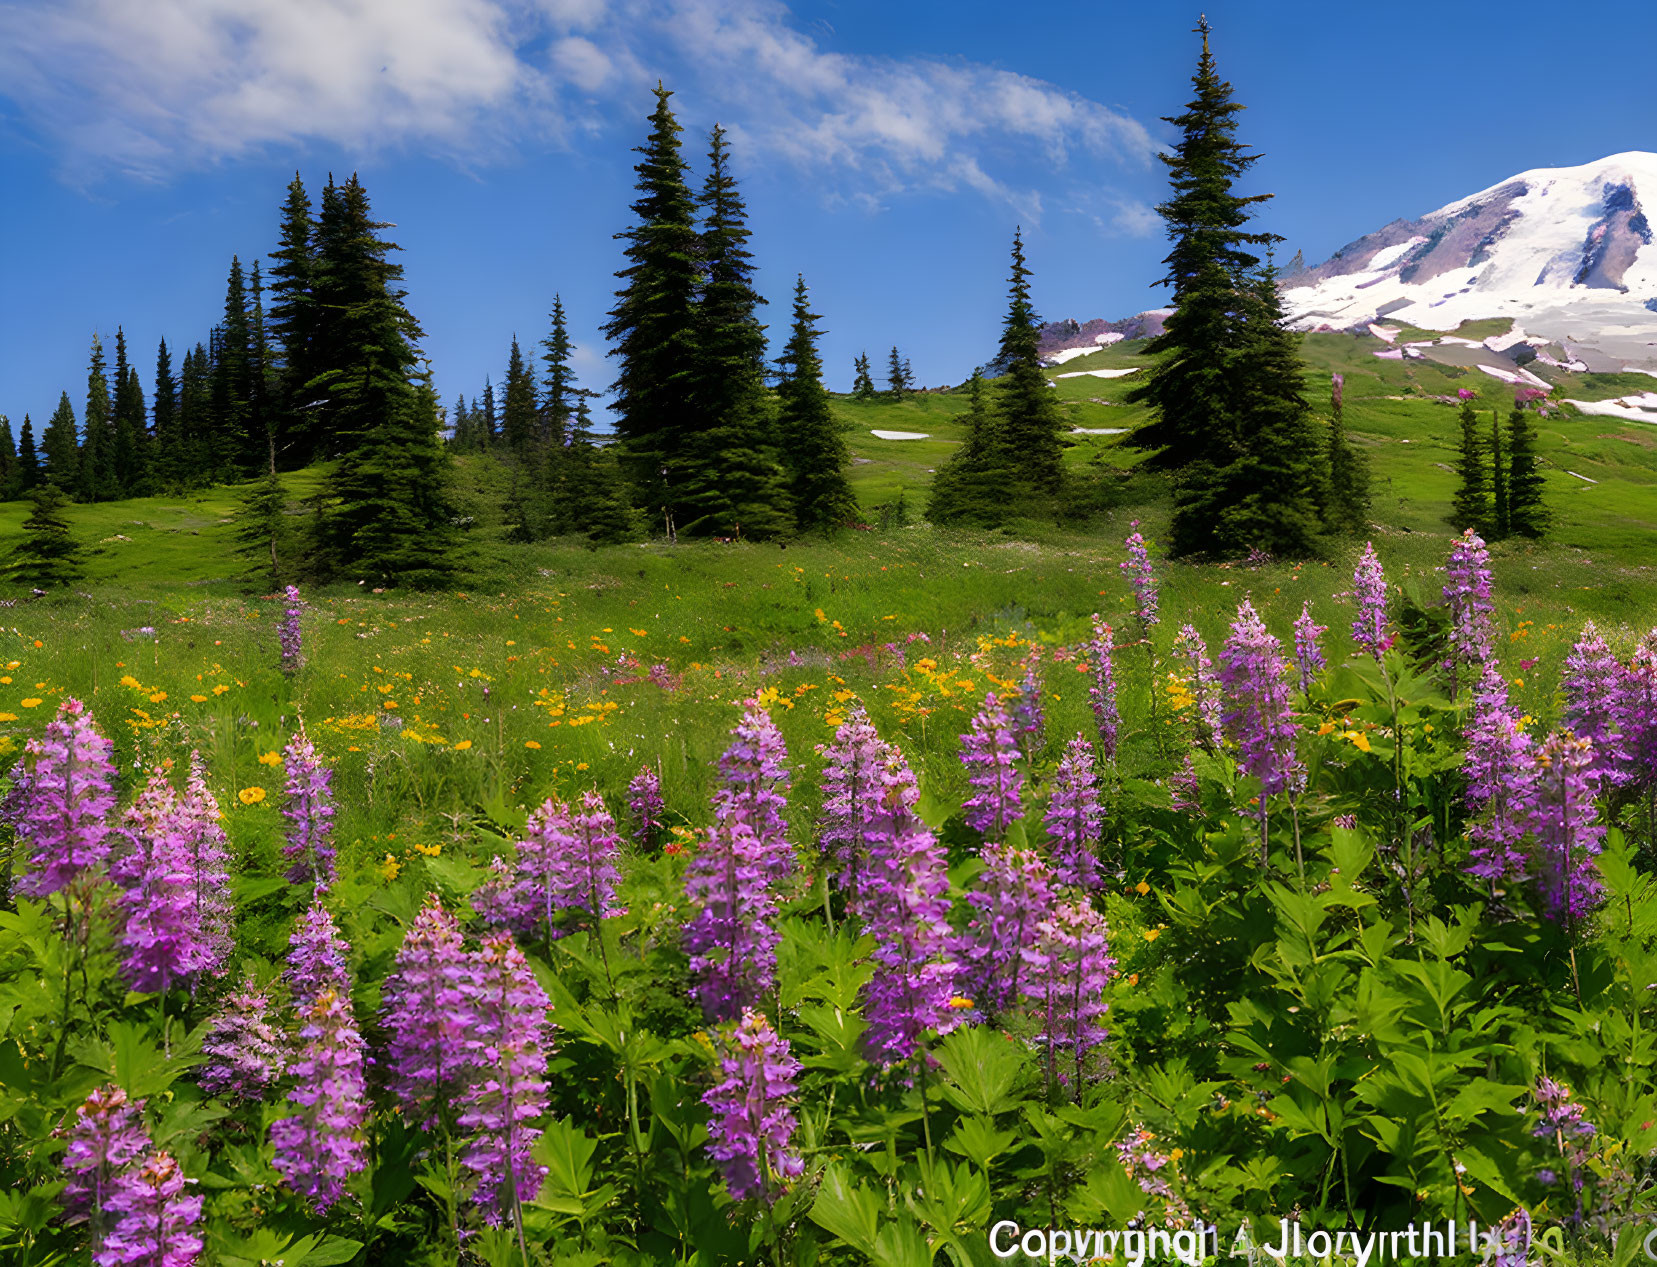 Colorful wildflower meadow with purple lupines and snow-capped mountain